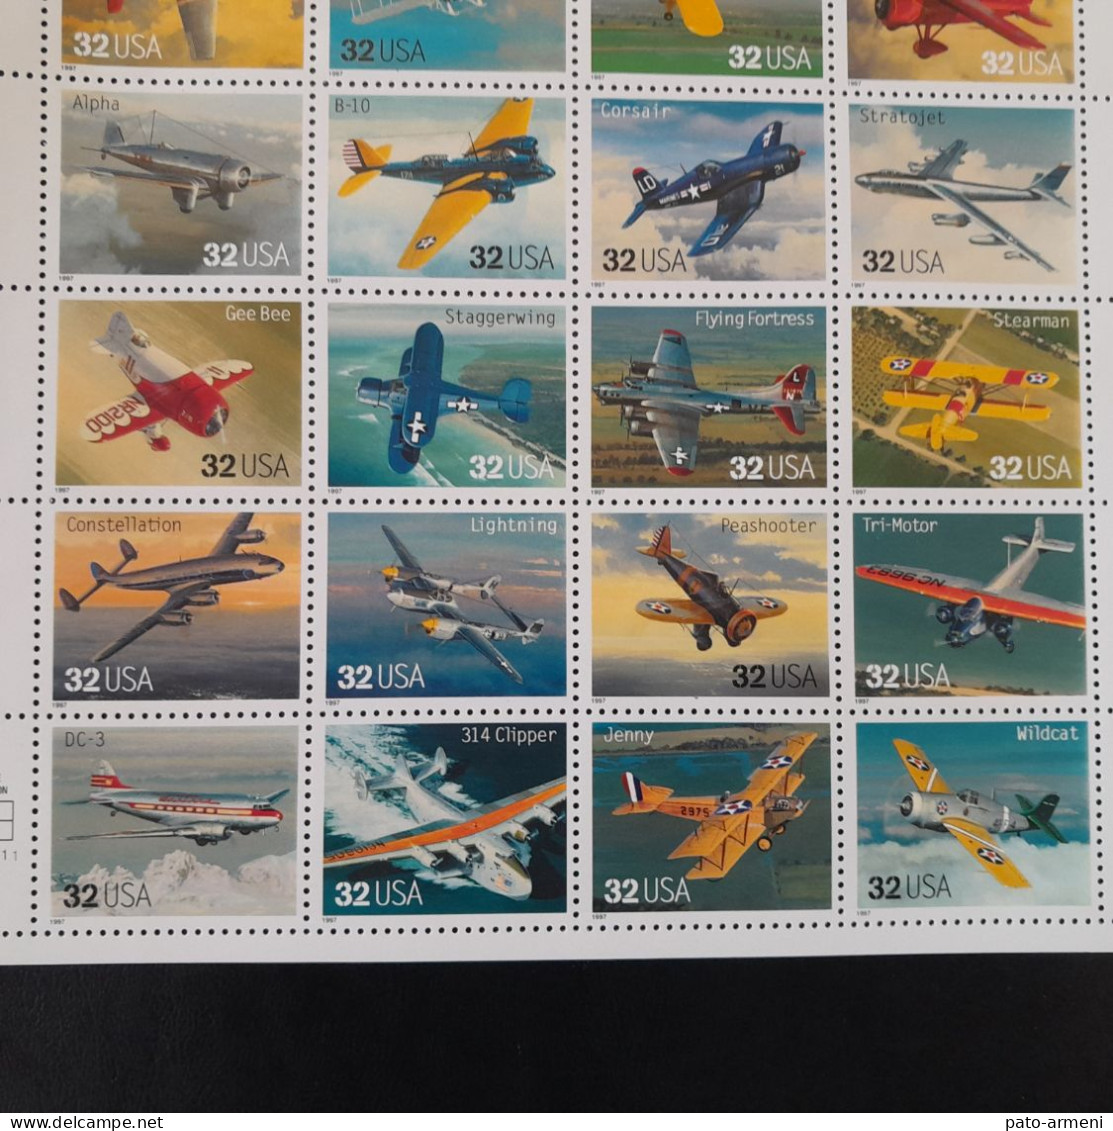 Timbres US (1997)- Classic American Aircraft Feuille De 20- SC#3142 - Unused Stamps